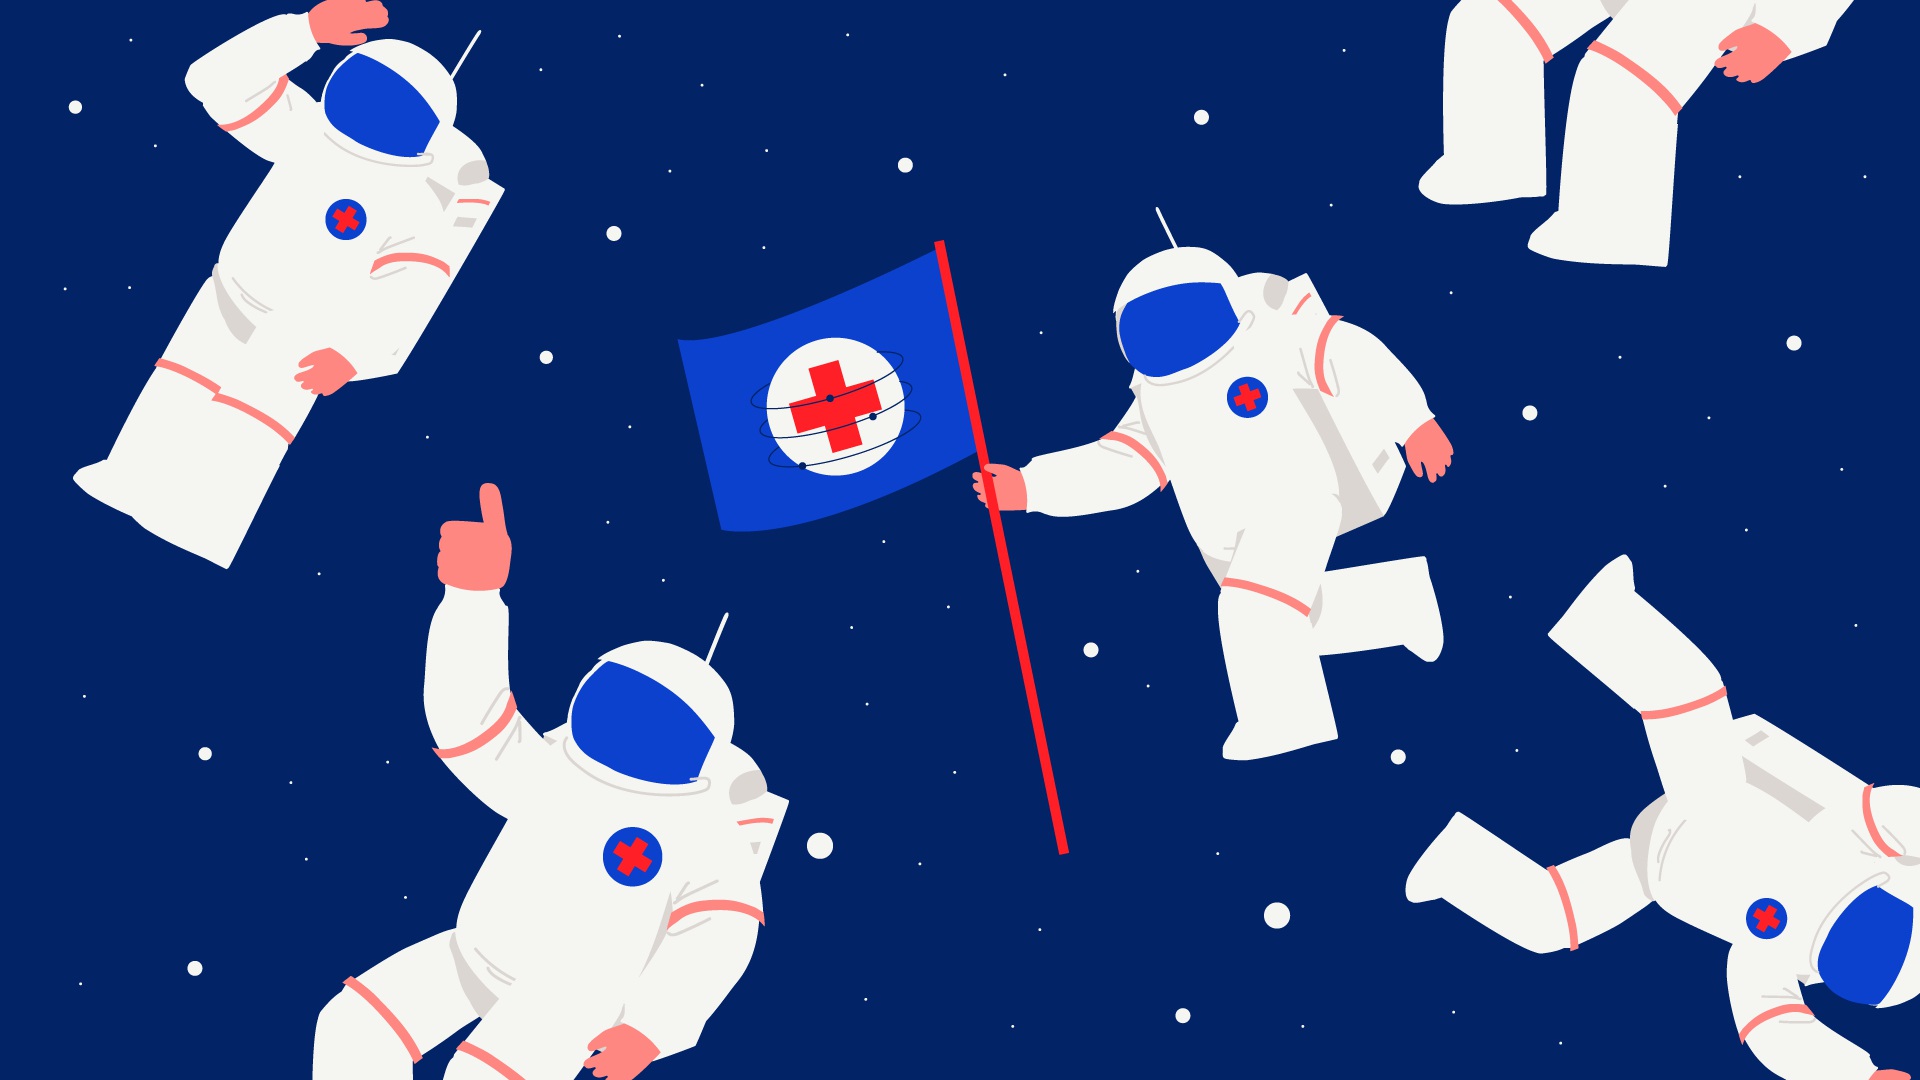 Effective leadership in healthcare: Learnings from NASA